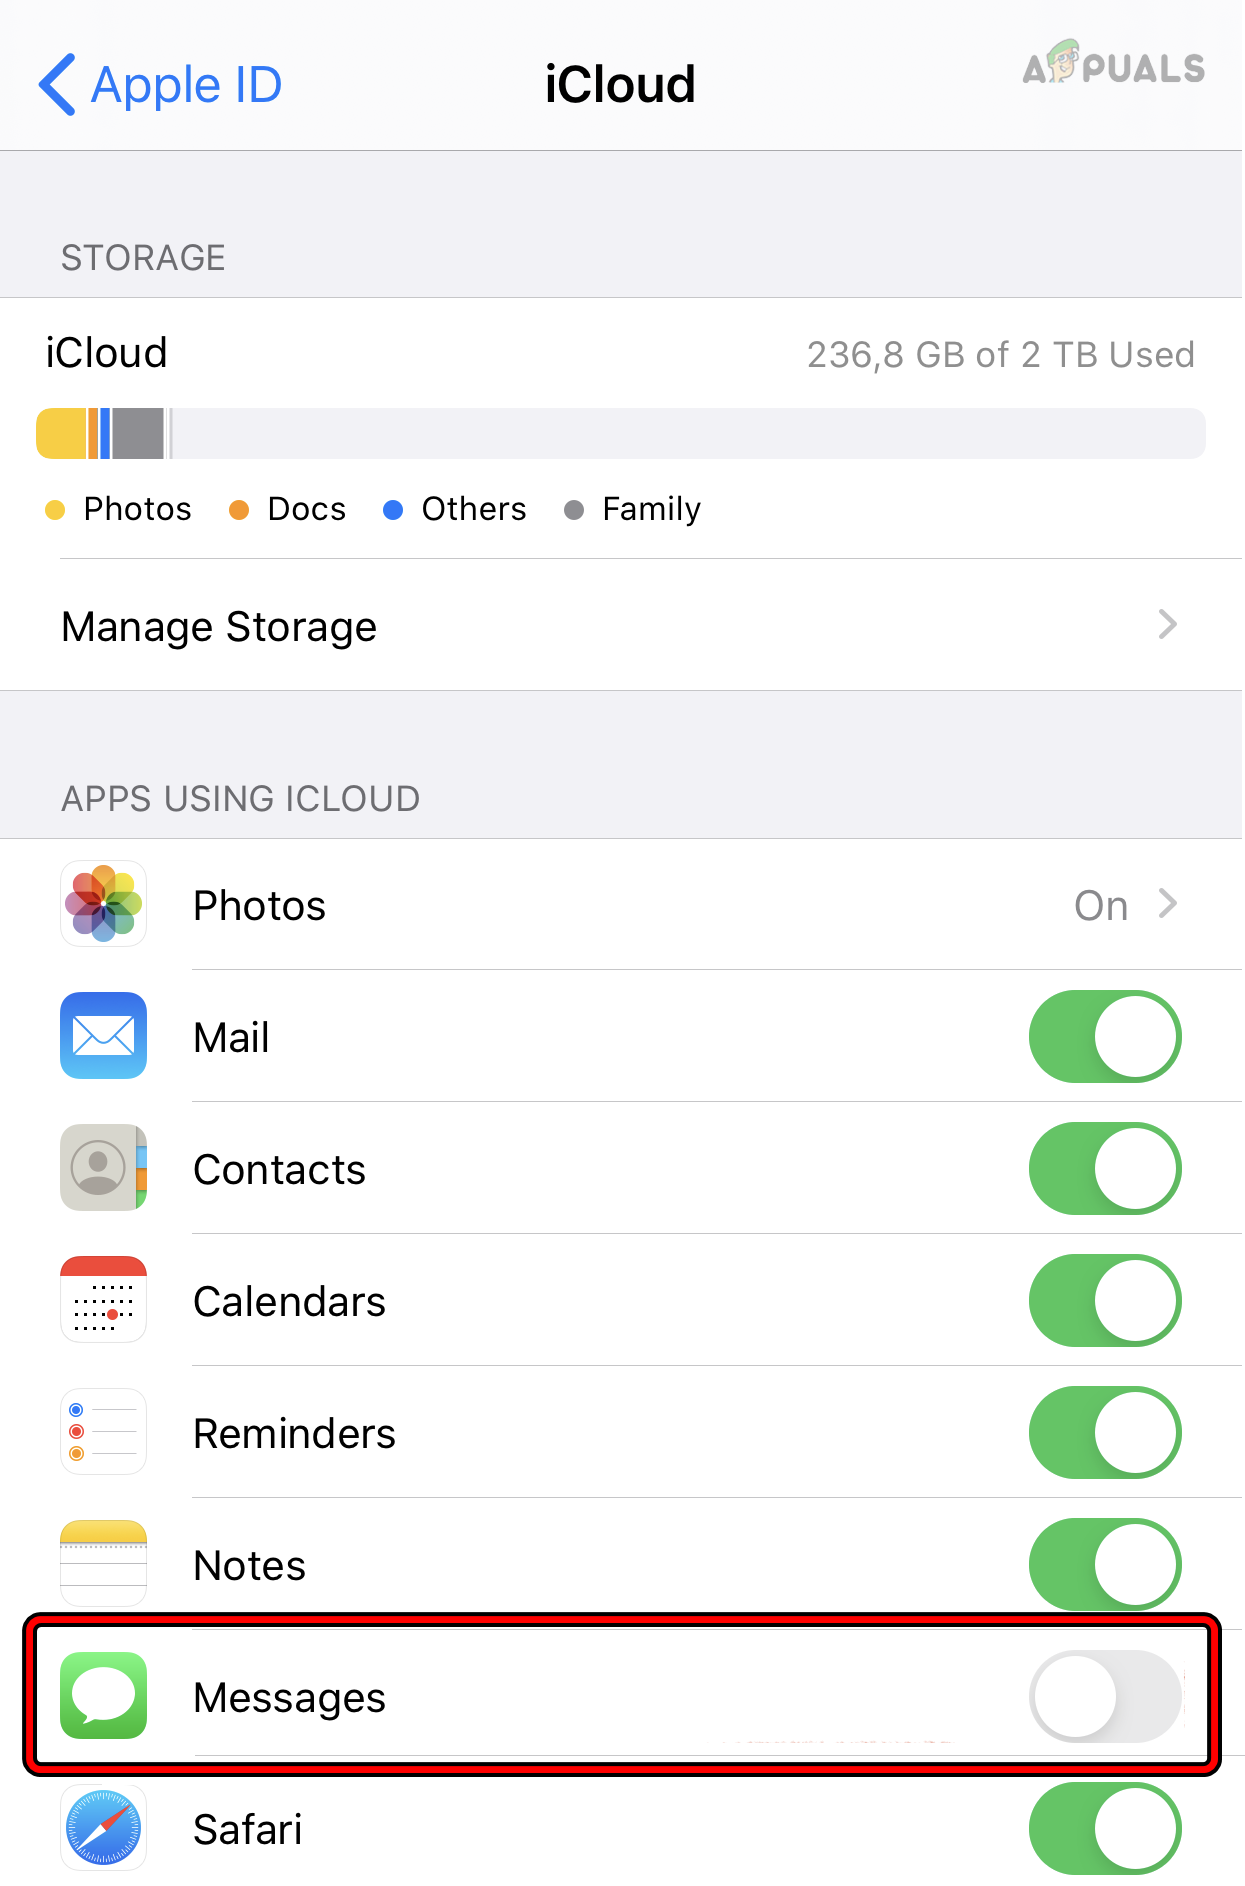 Disable Messages Sync in the iCloud Settings on the iPhone